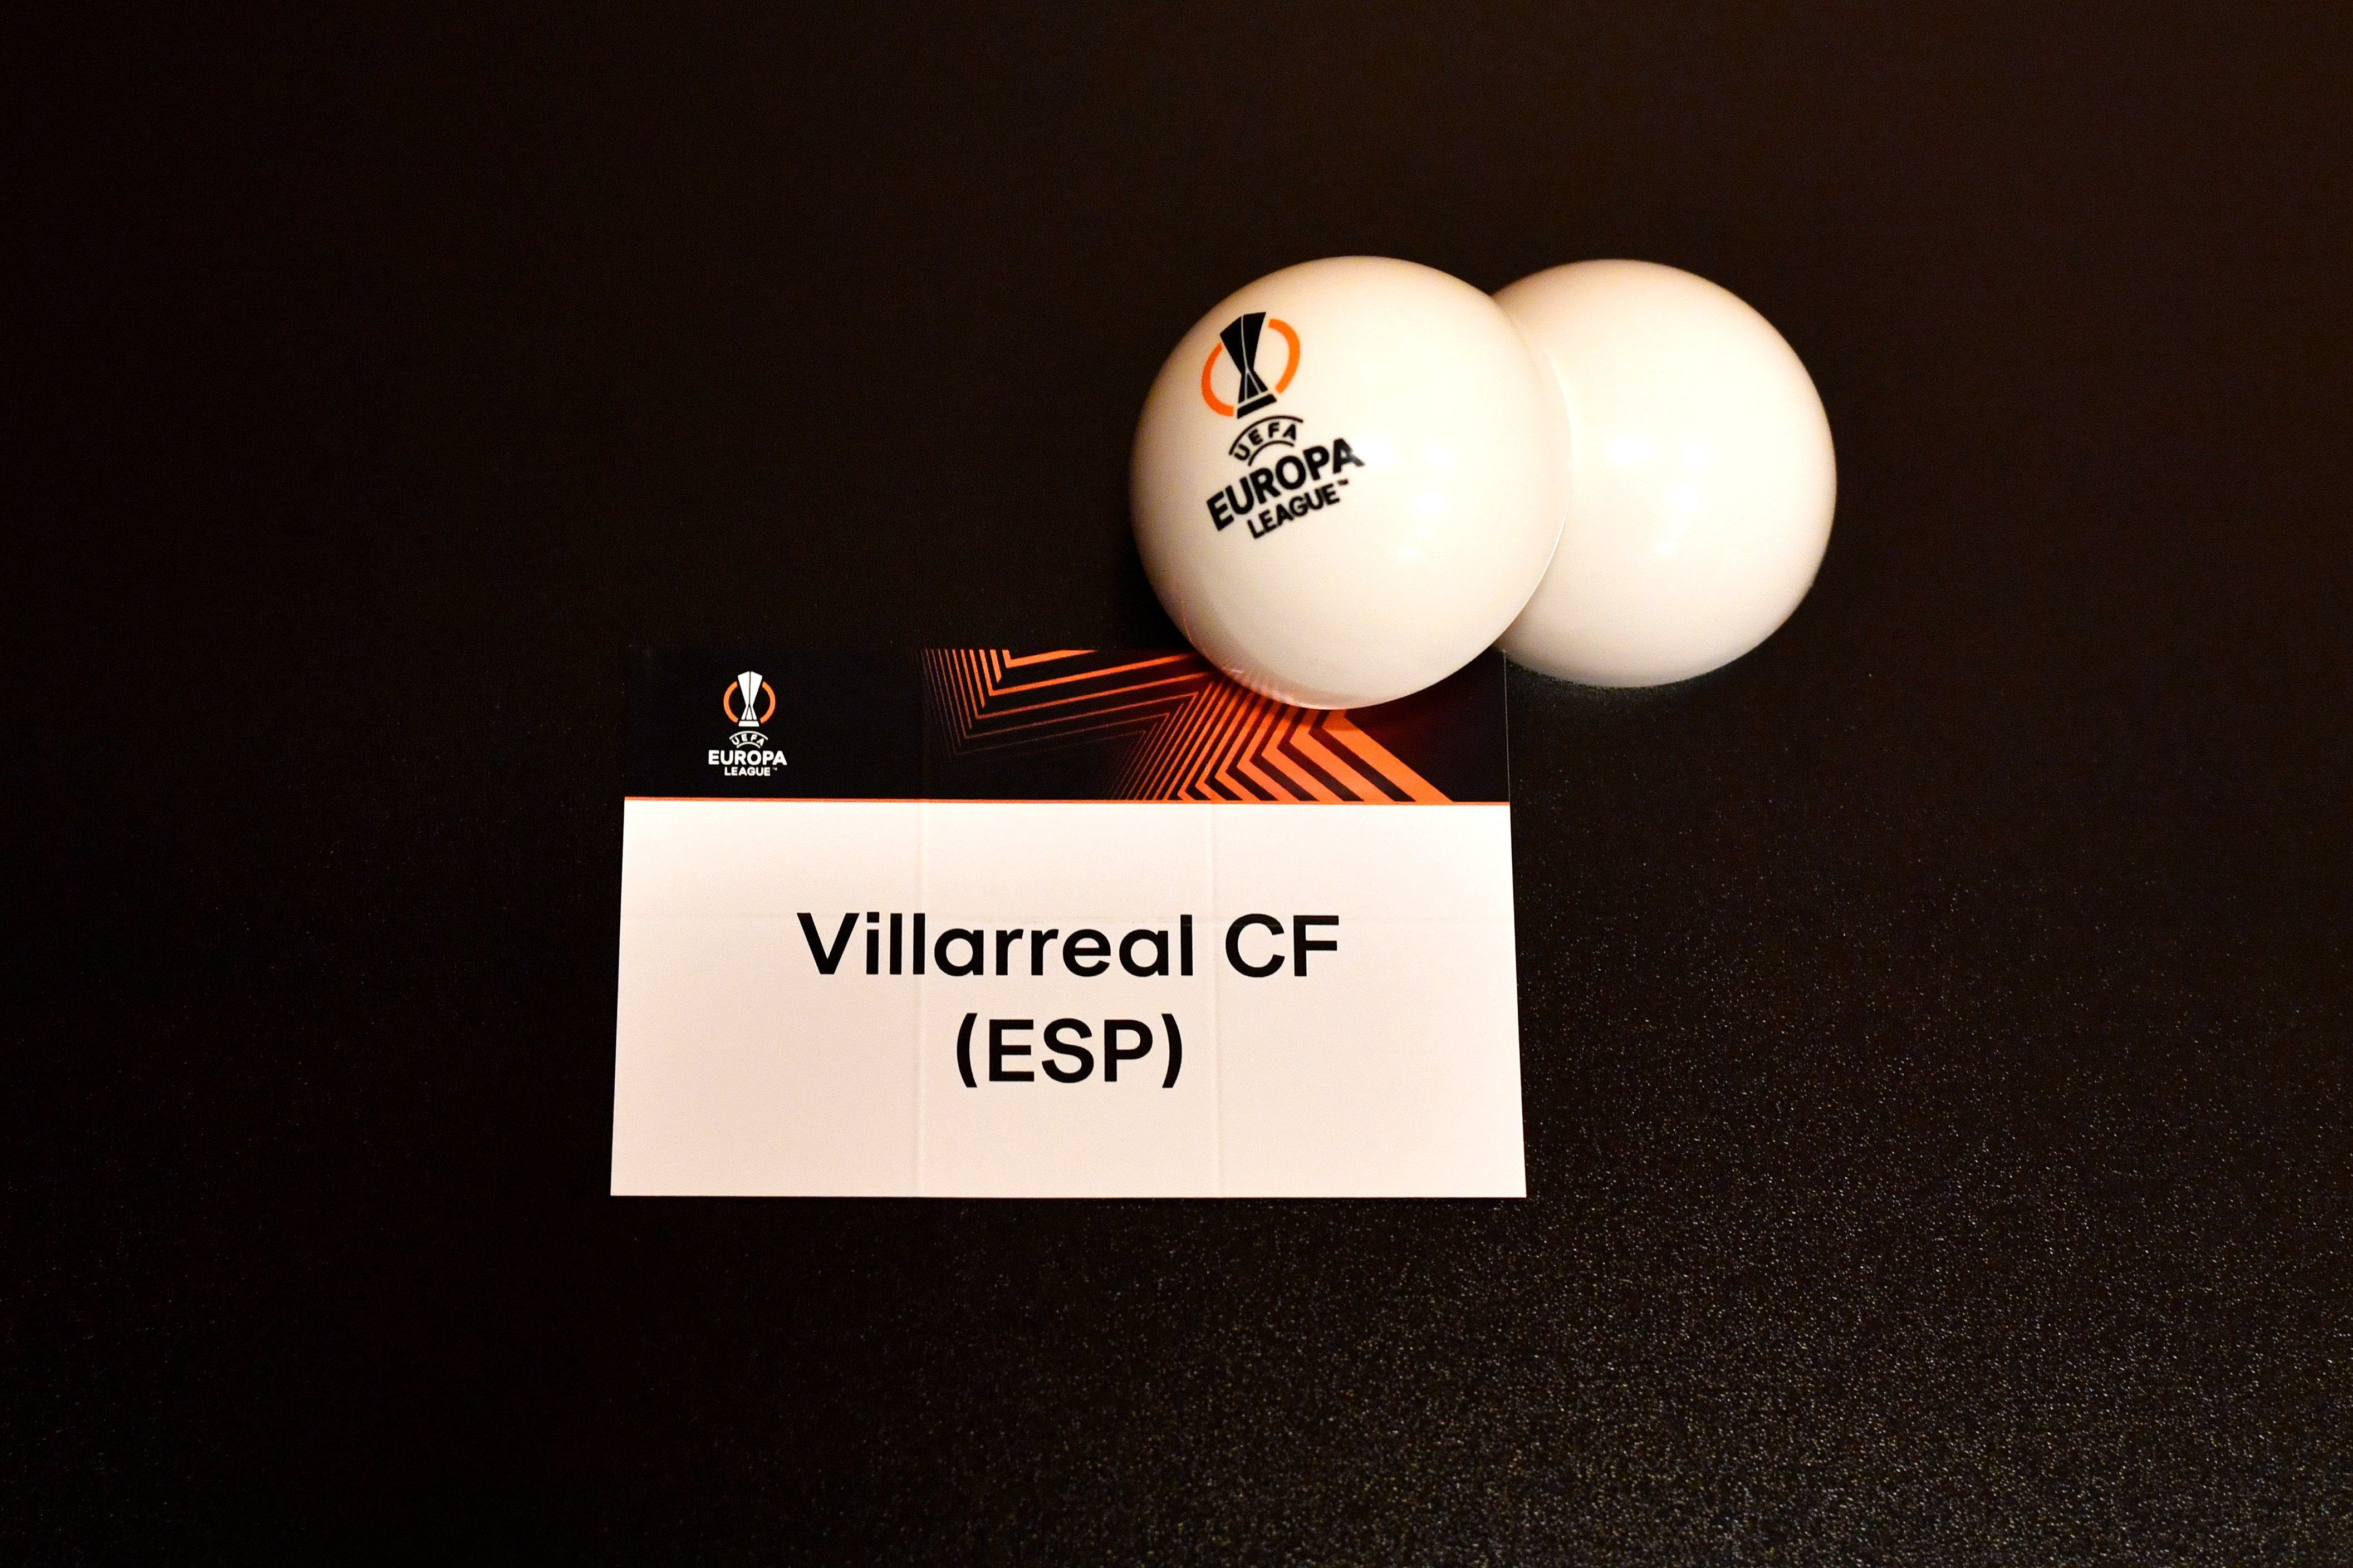 UEFA Europa League 2023/24 Group Stage Draw